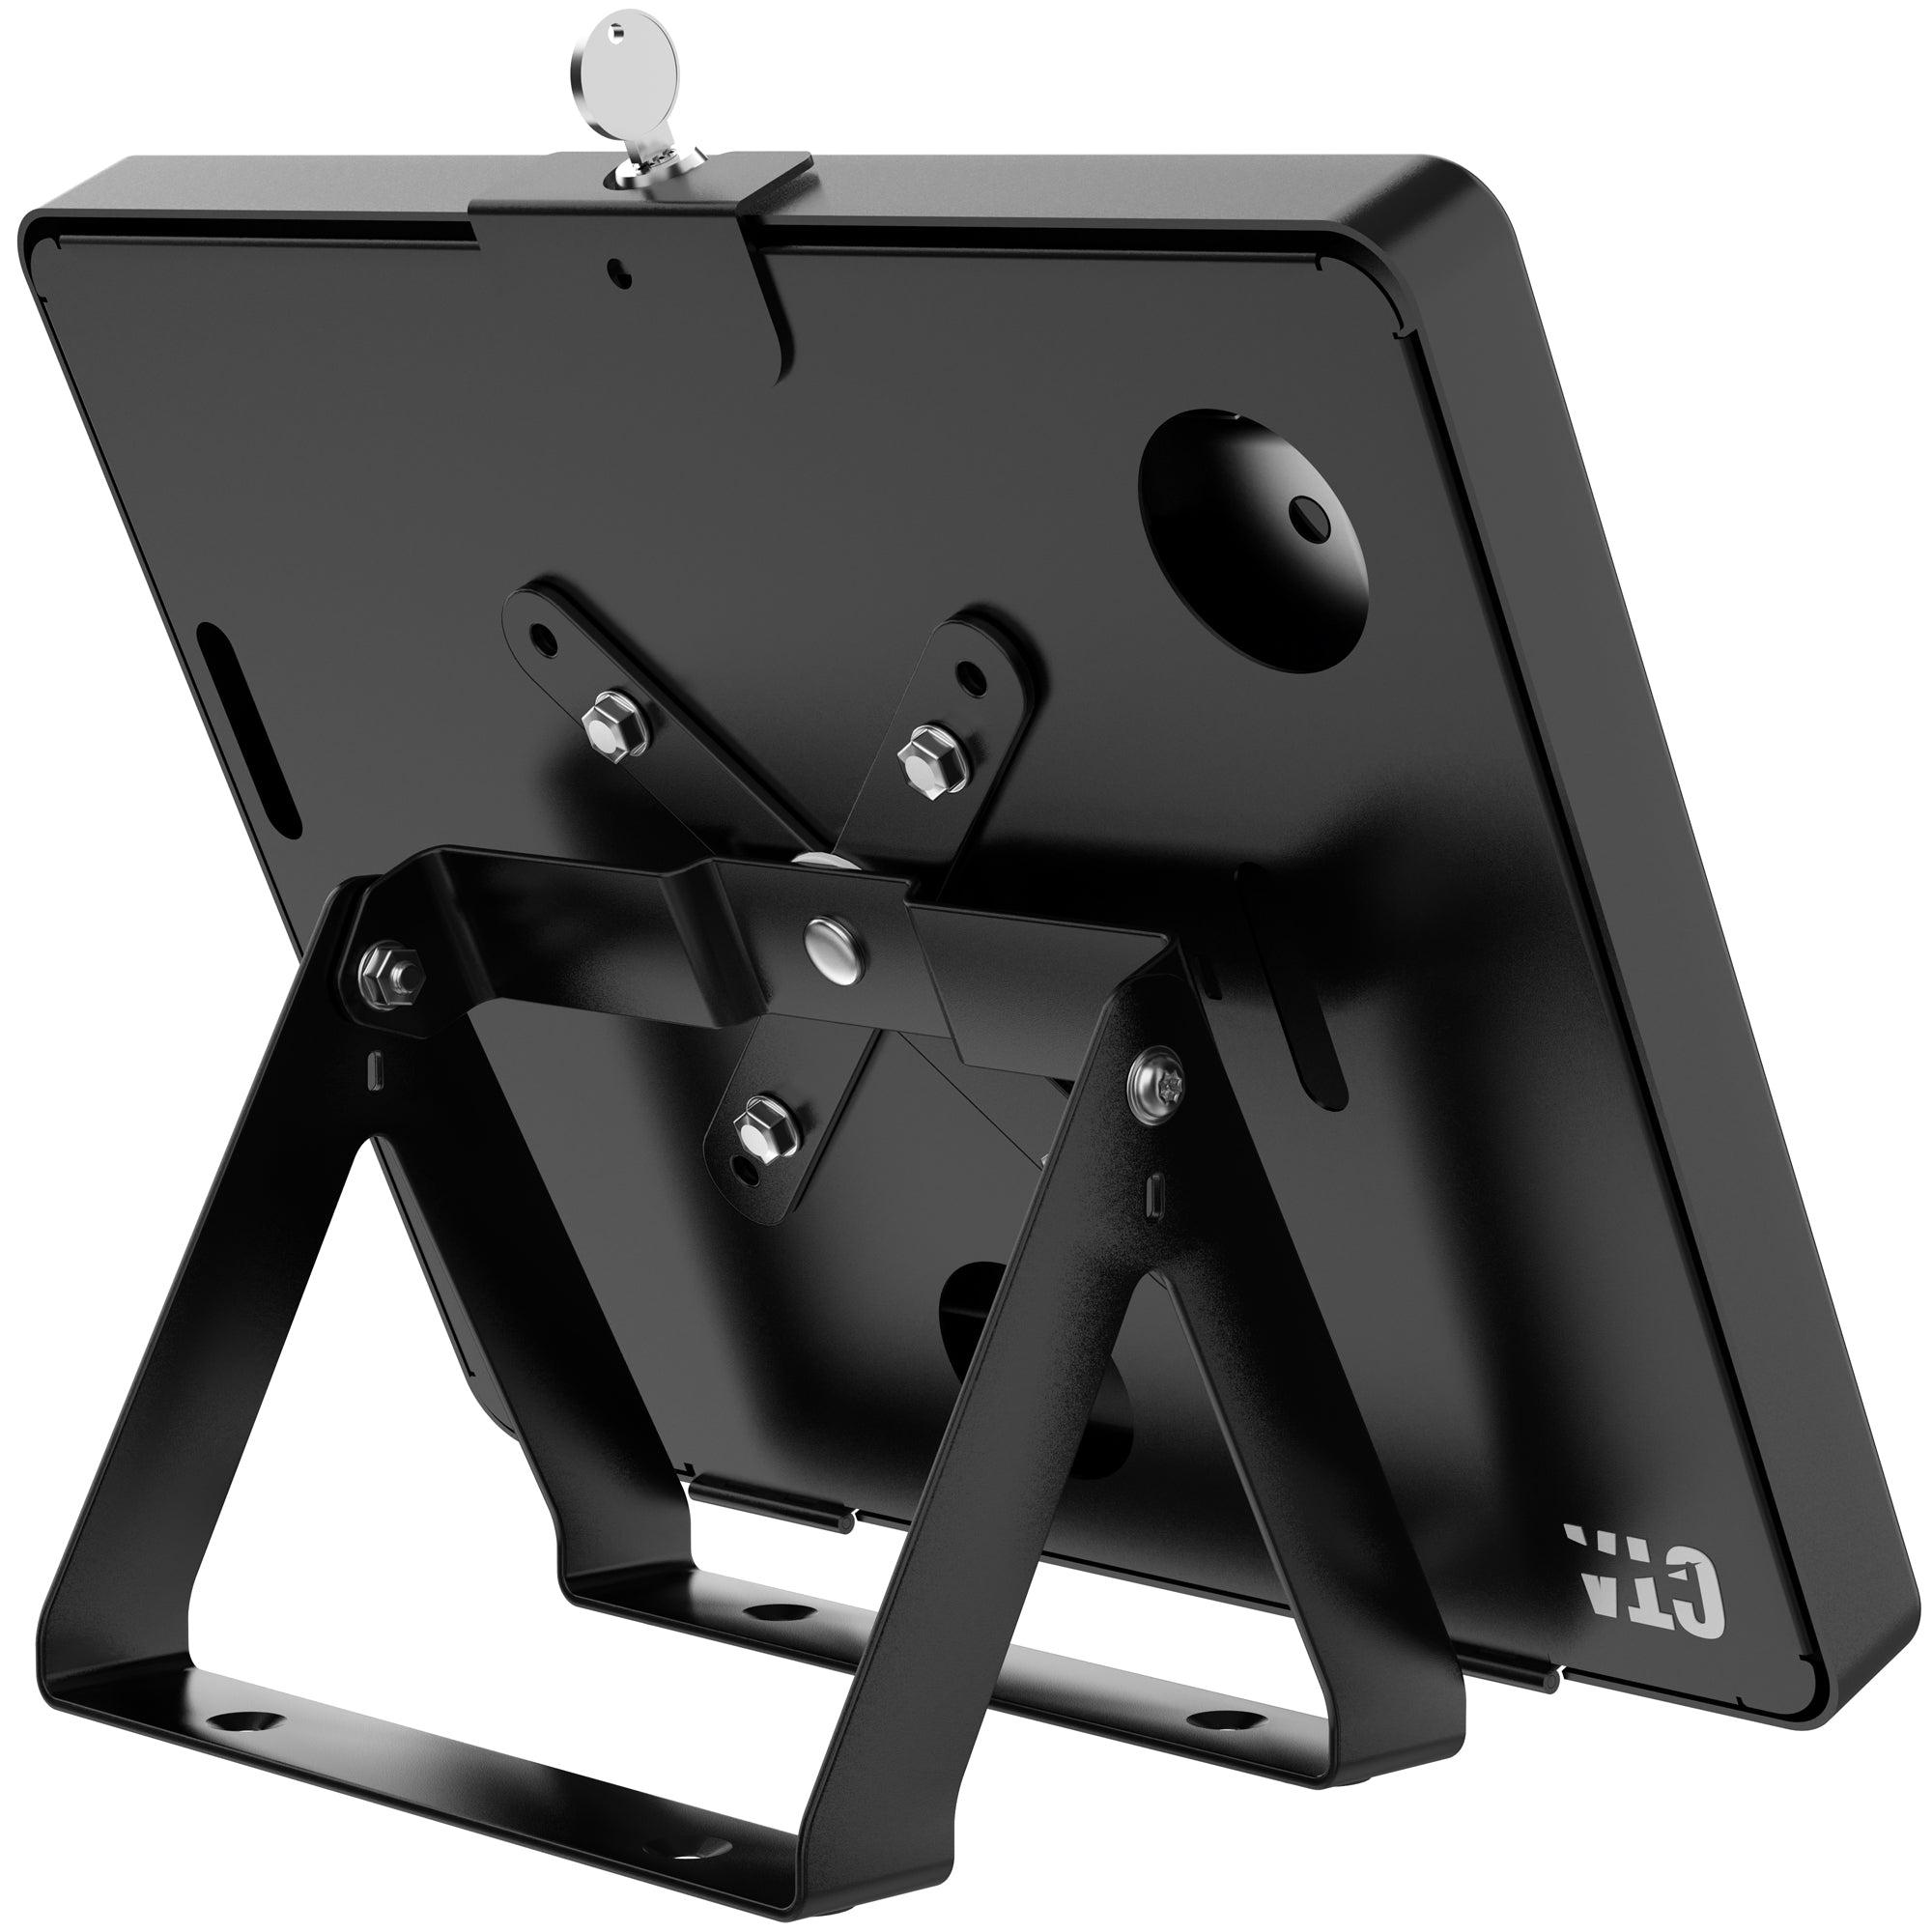 Full Rotation Desk Mount with Universal Security Enclosure (Black)